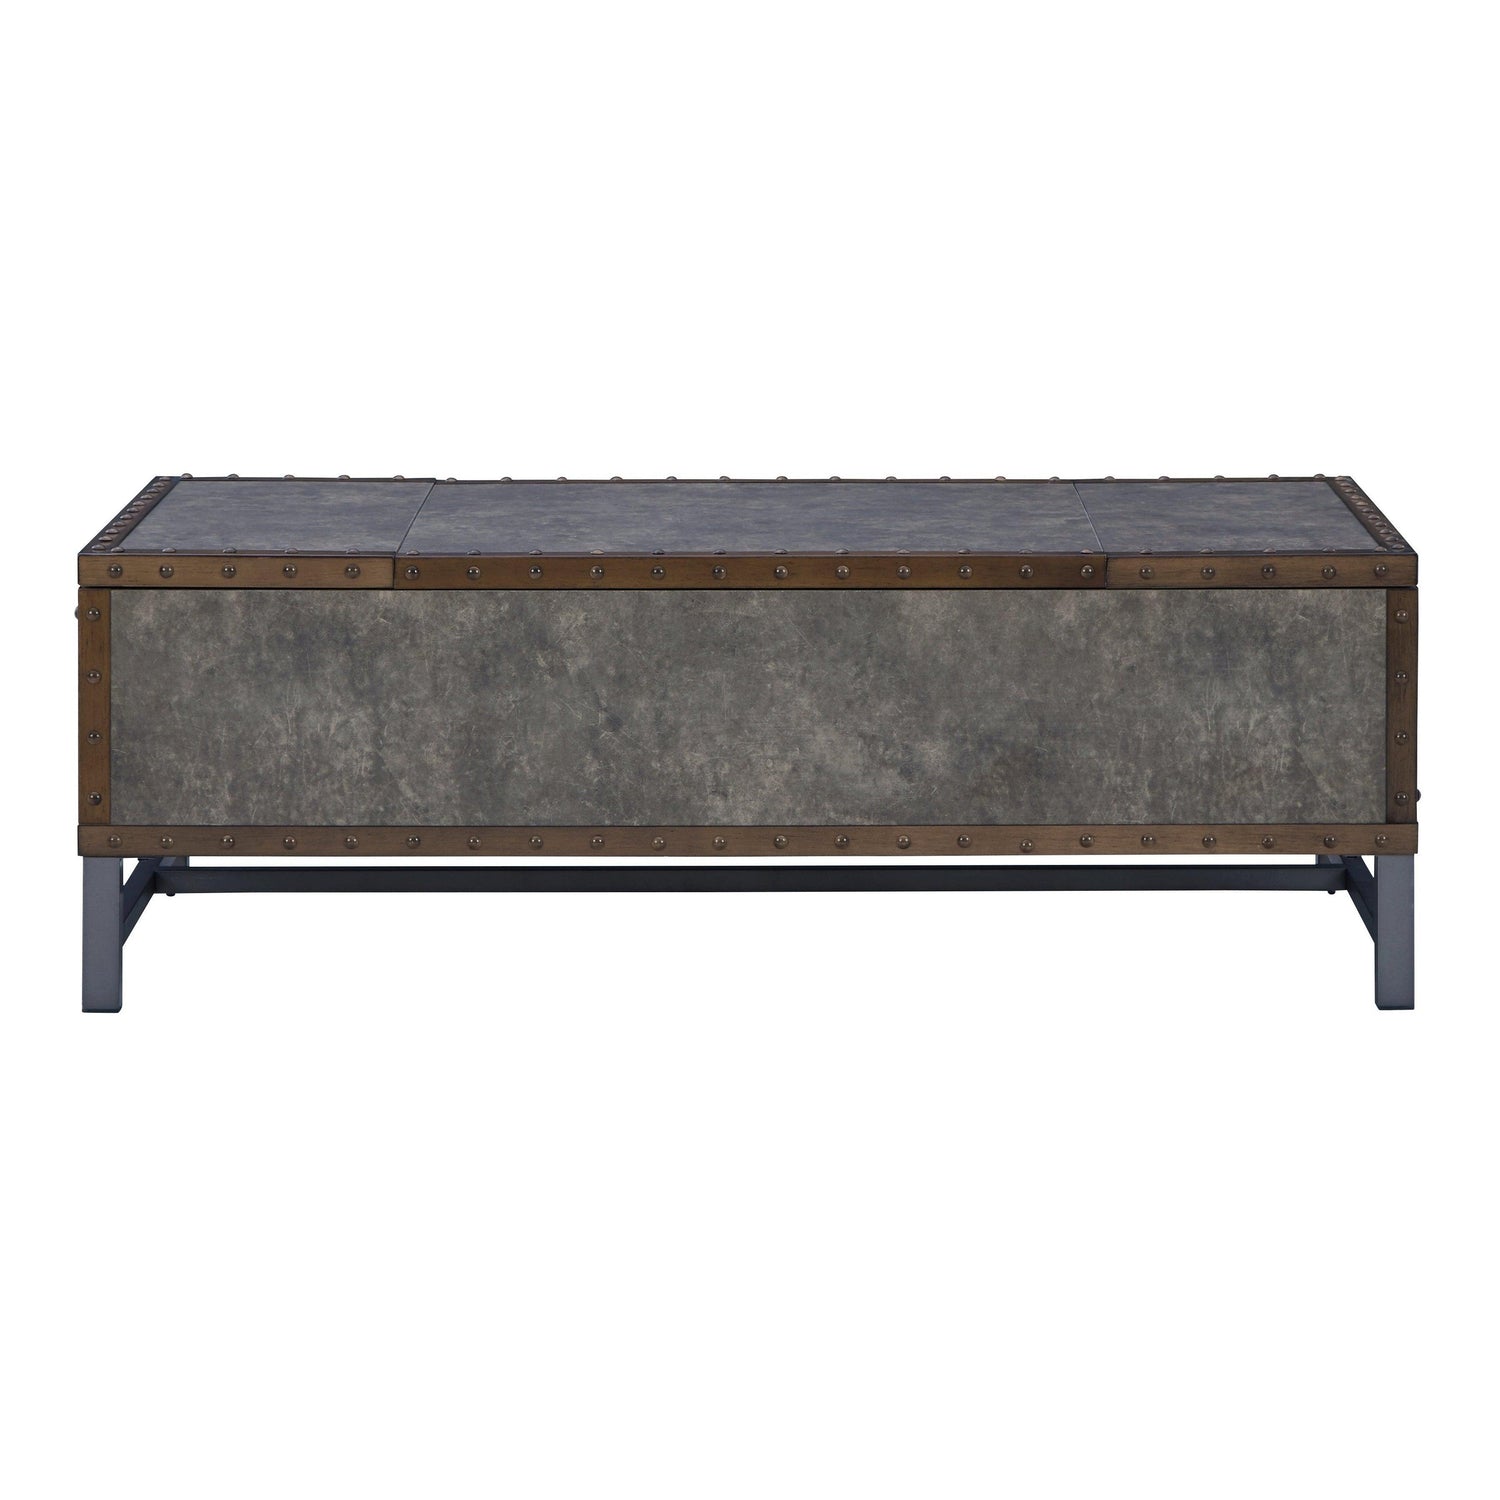 Derrylin Lift-Top Coffee Table Ash-T973-9